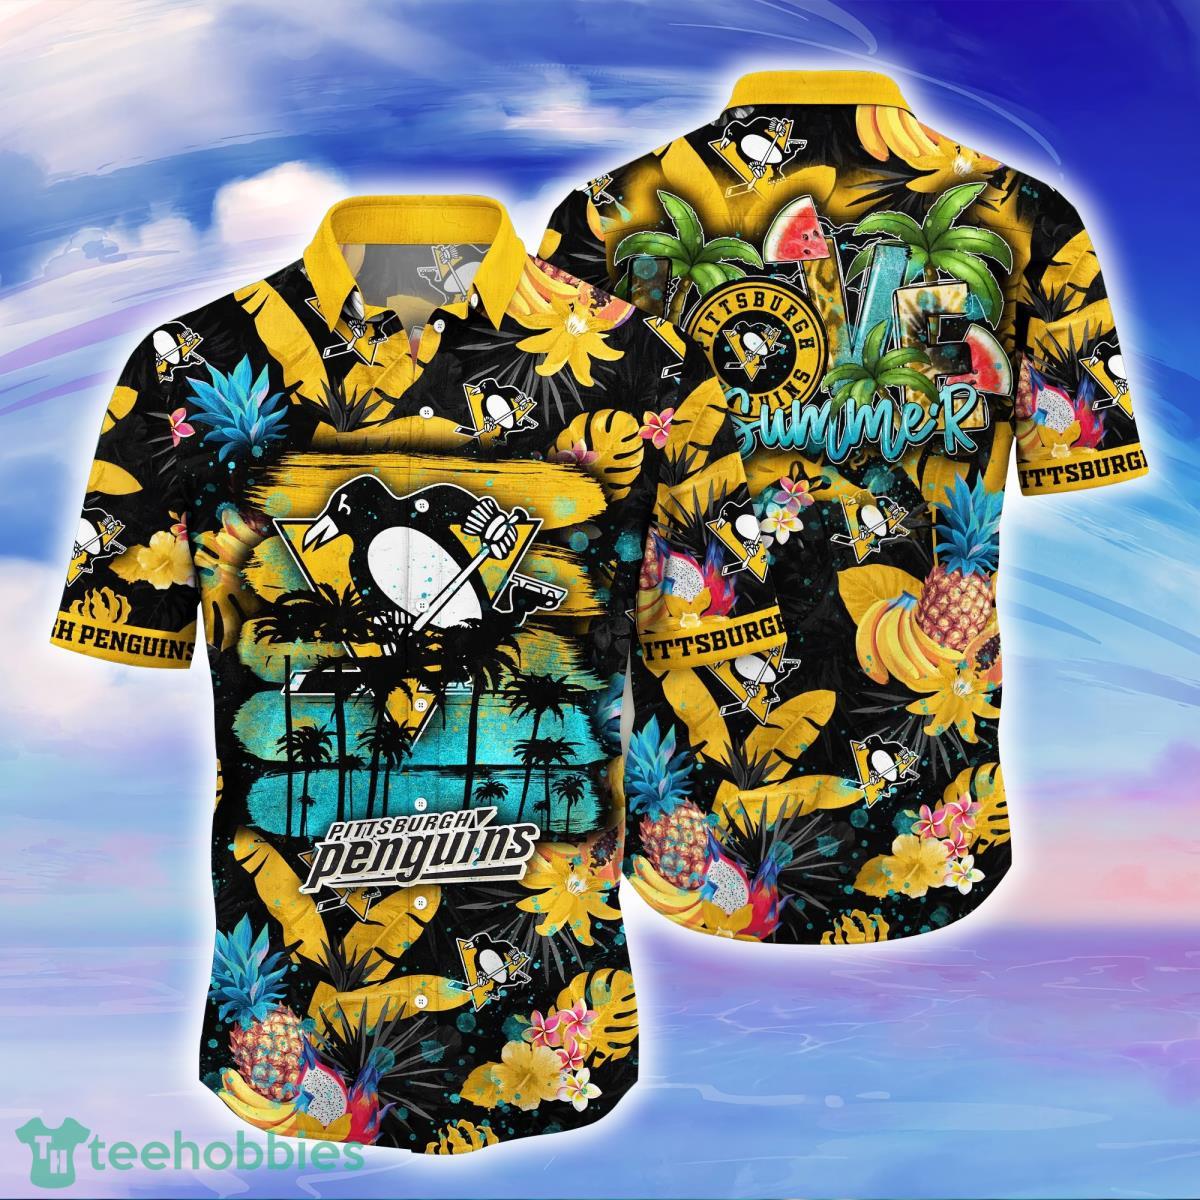 Pittsburgh Penguins NHL Flower Hawaii Shirt And Tshirt For Fans